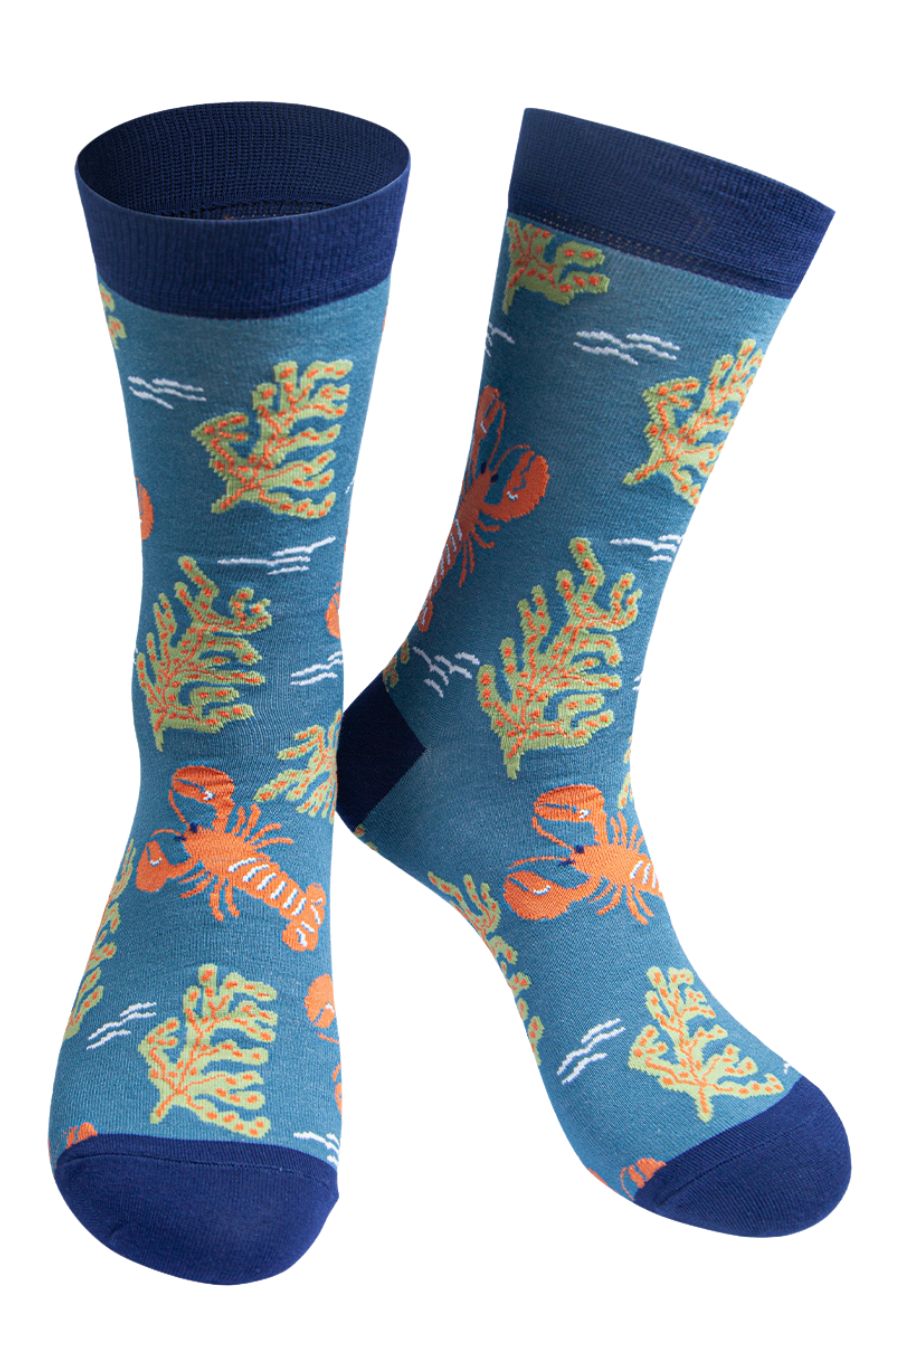 blue socks with a pattern of lobsters and ocean plant life